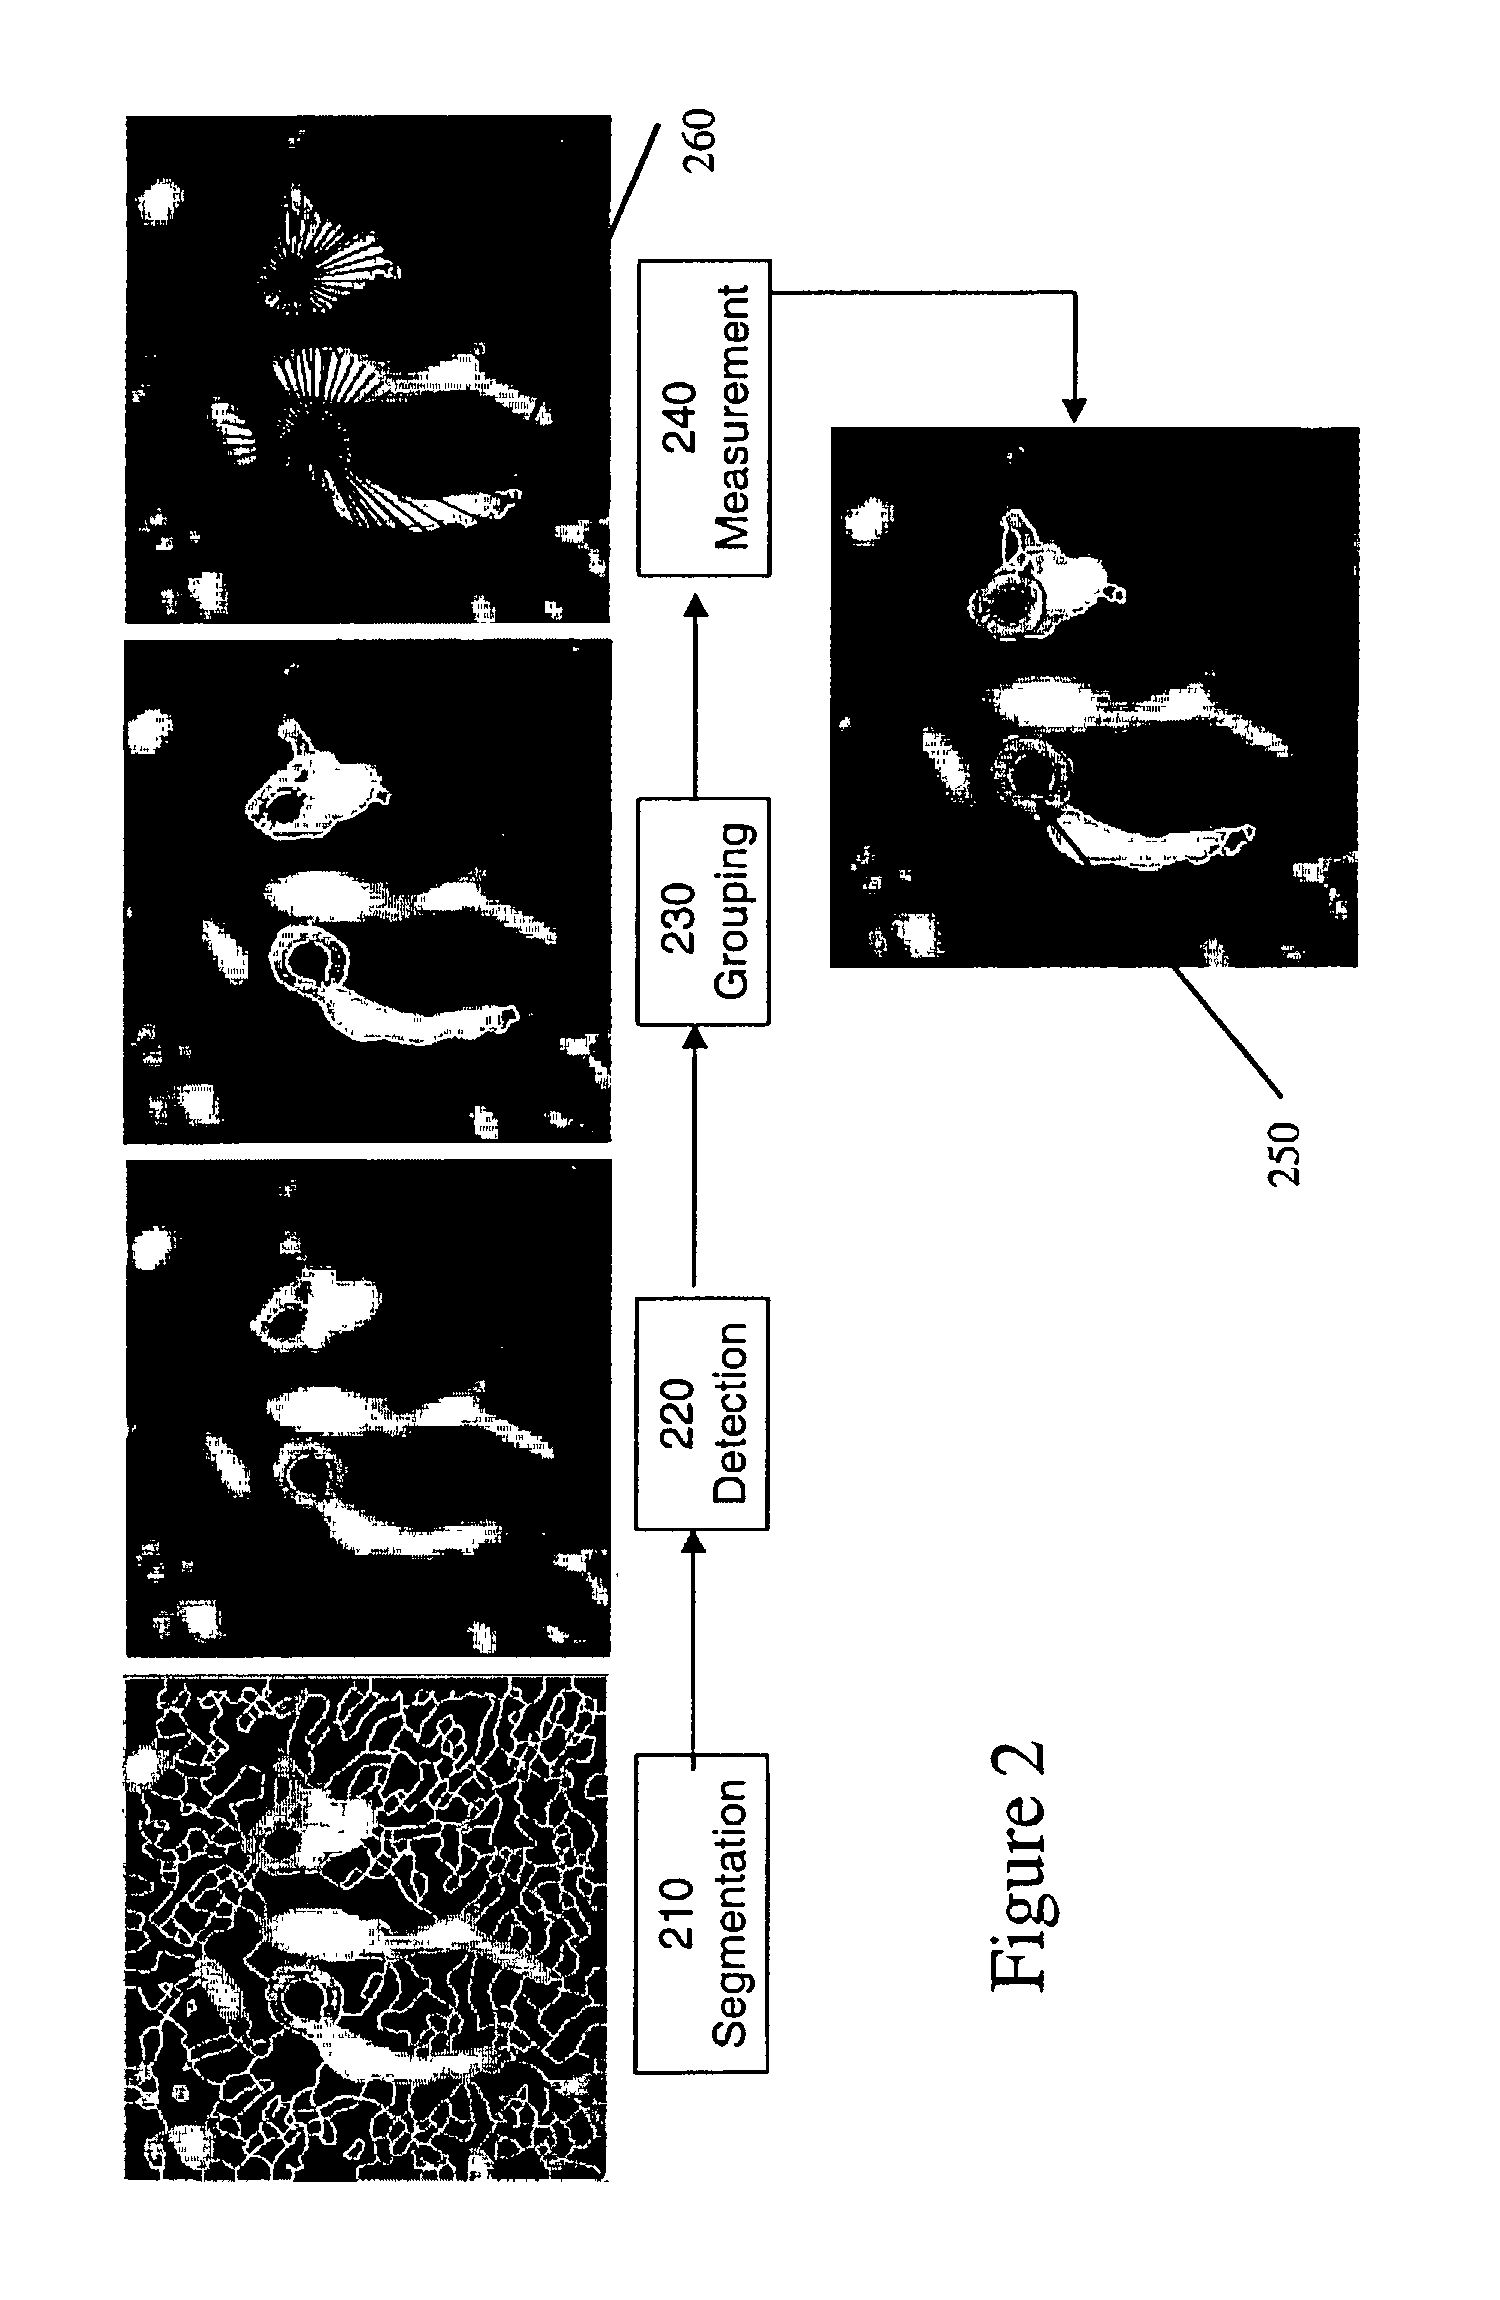 Method and system for airway measurement